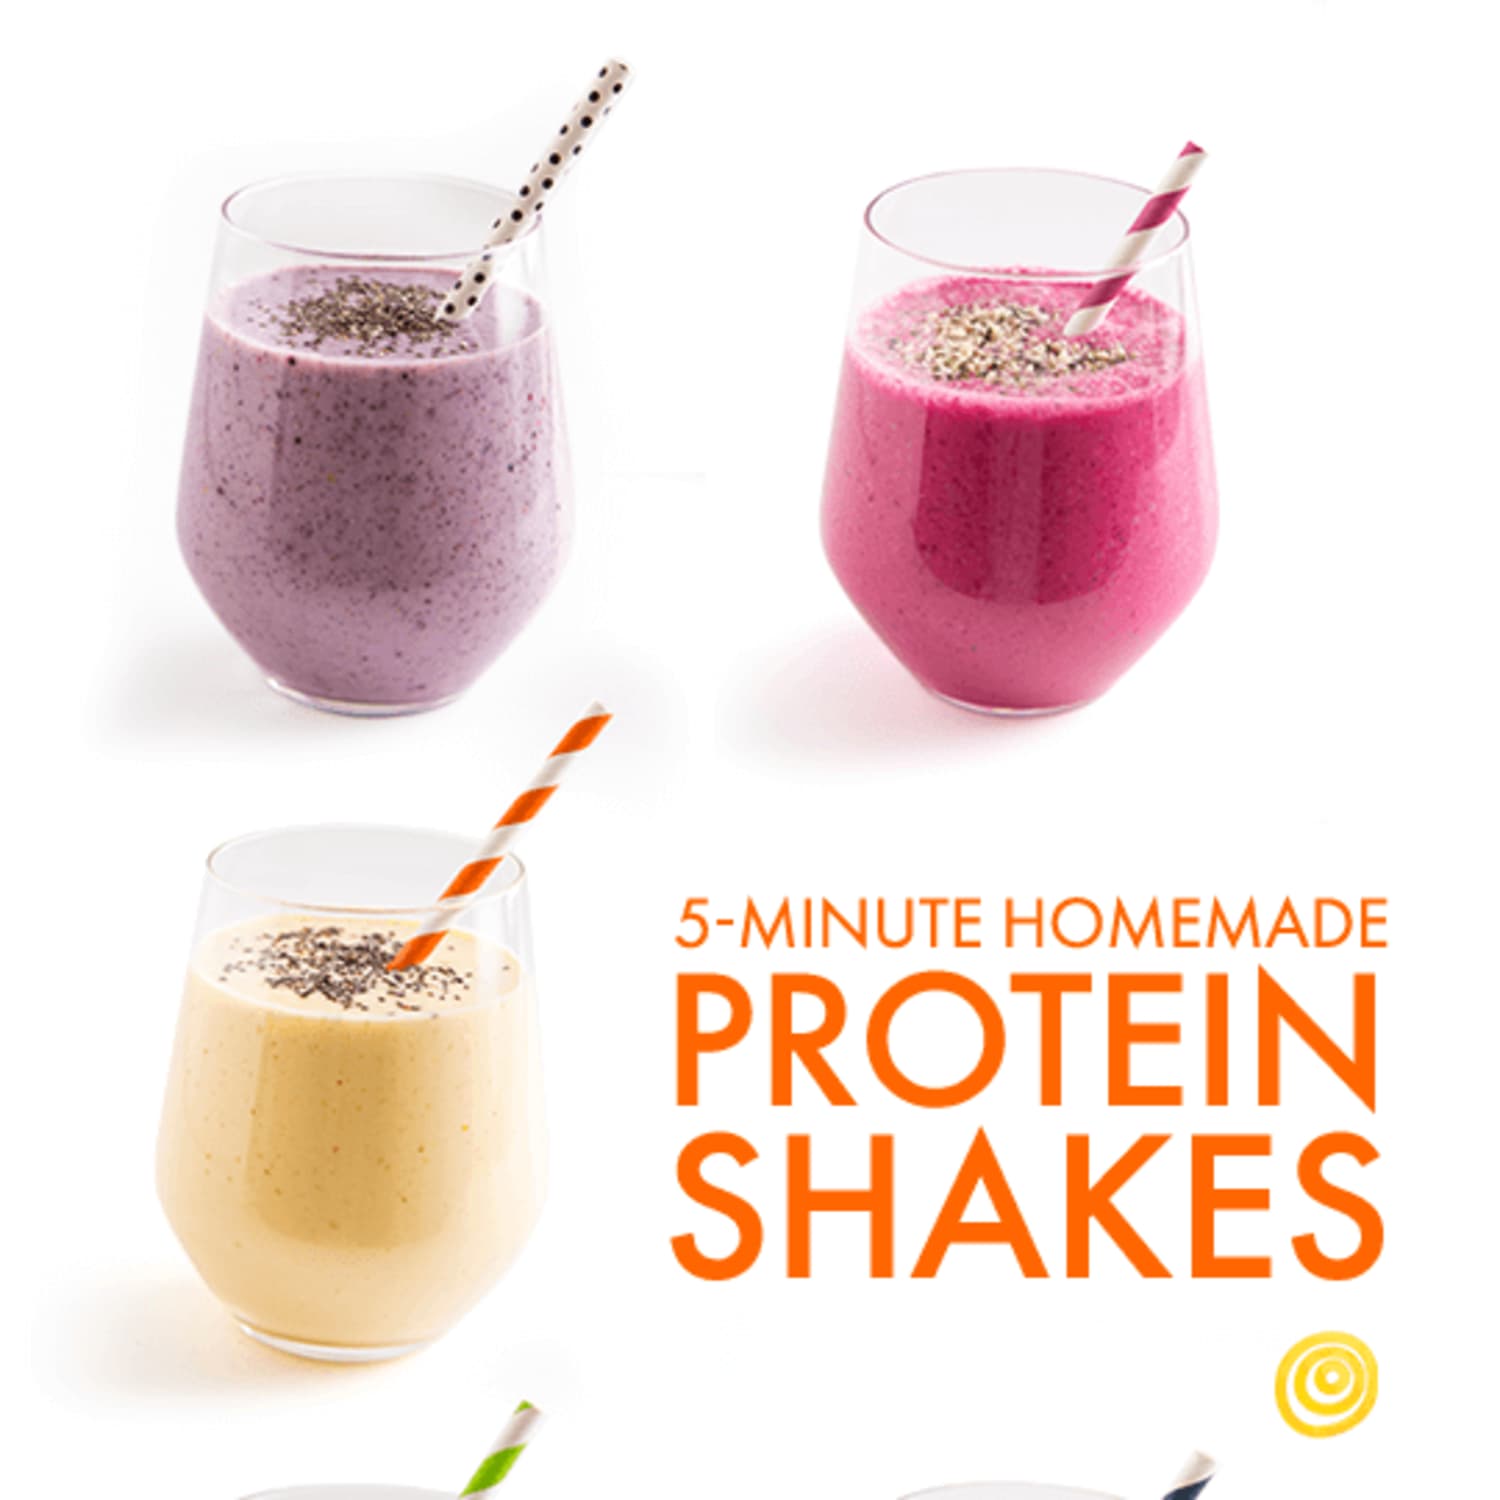 How to Make Homemade Protein Shakes for Kids, eHow